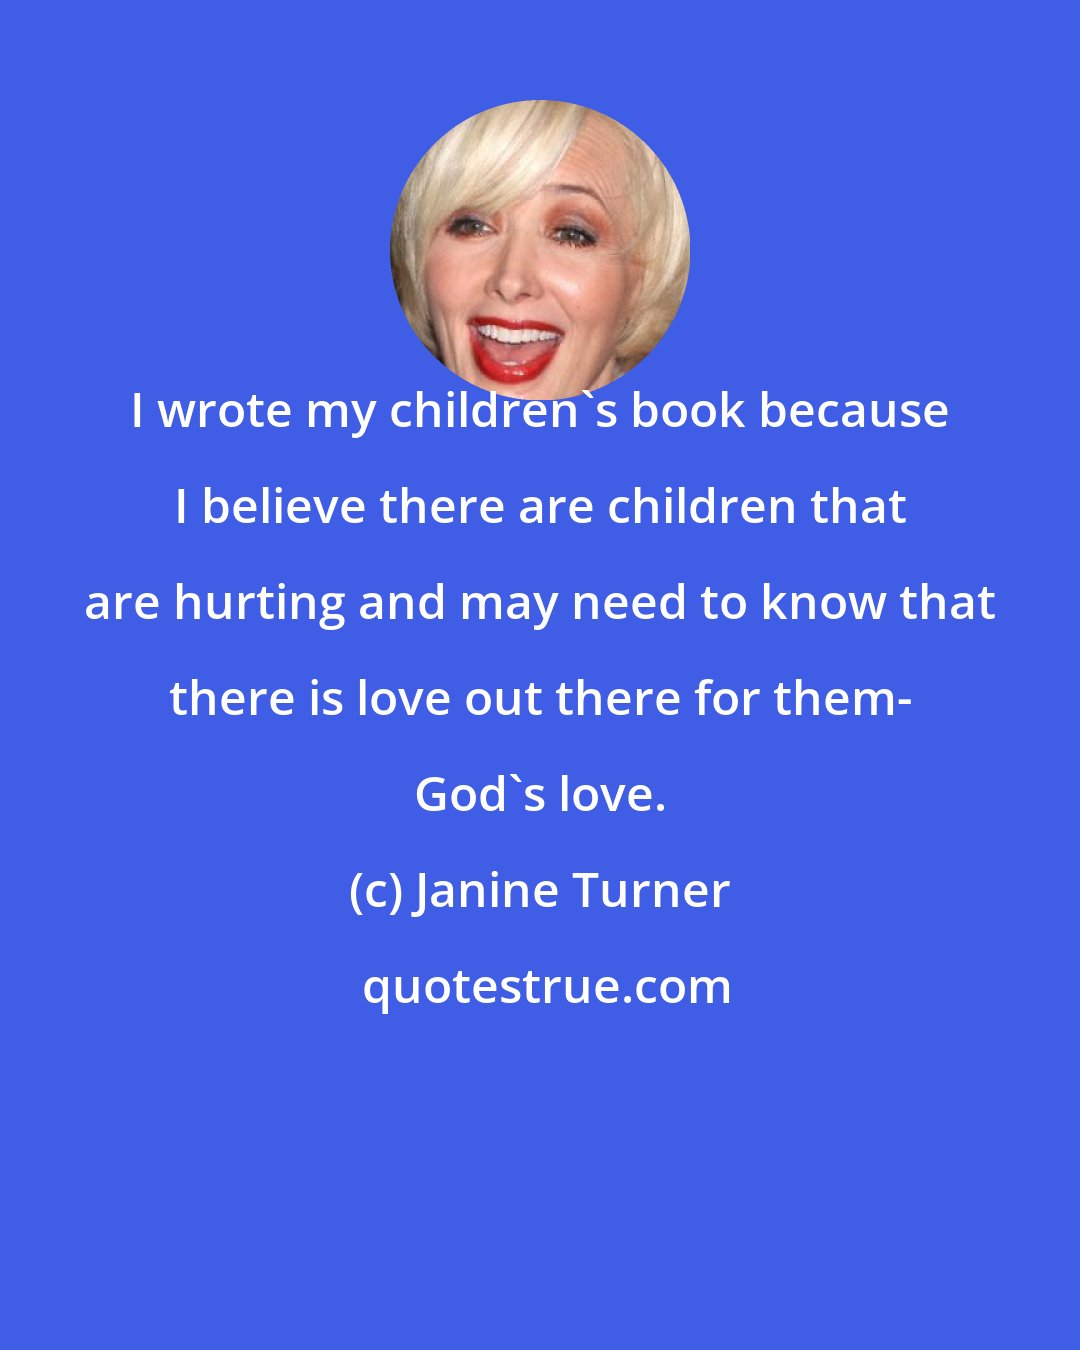 Janine Turner: I wrote my children's book because I believe there are children that are hurting and may need to know that there is love out there for them- God's love.